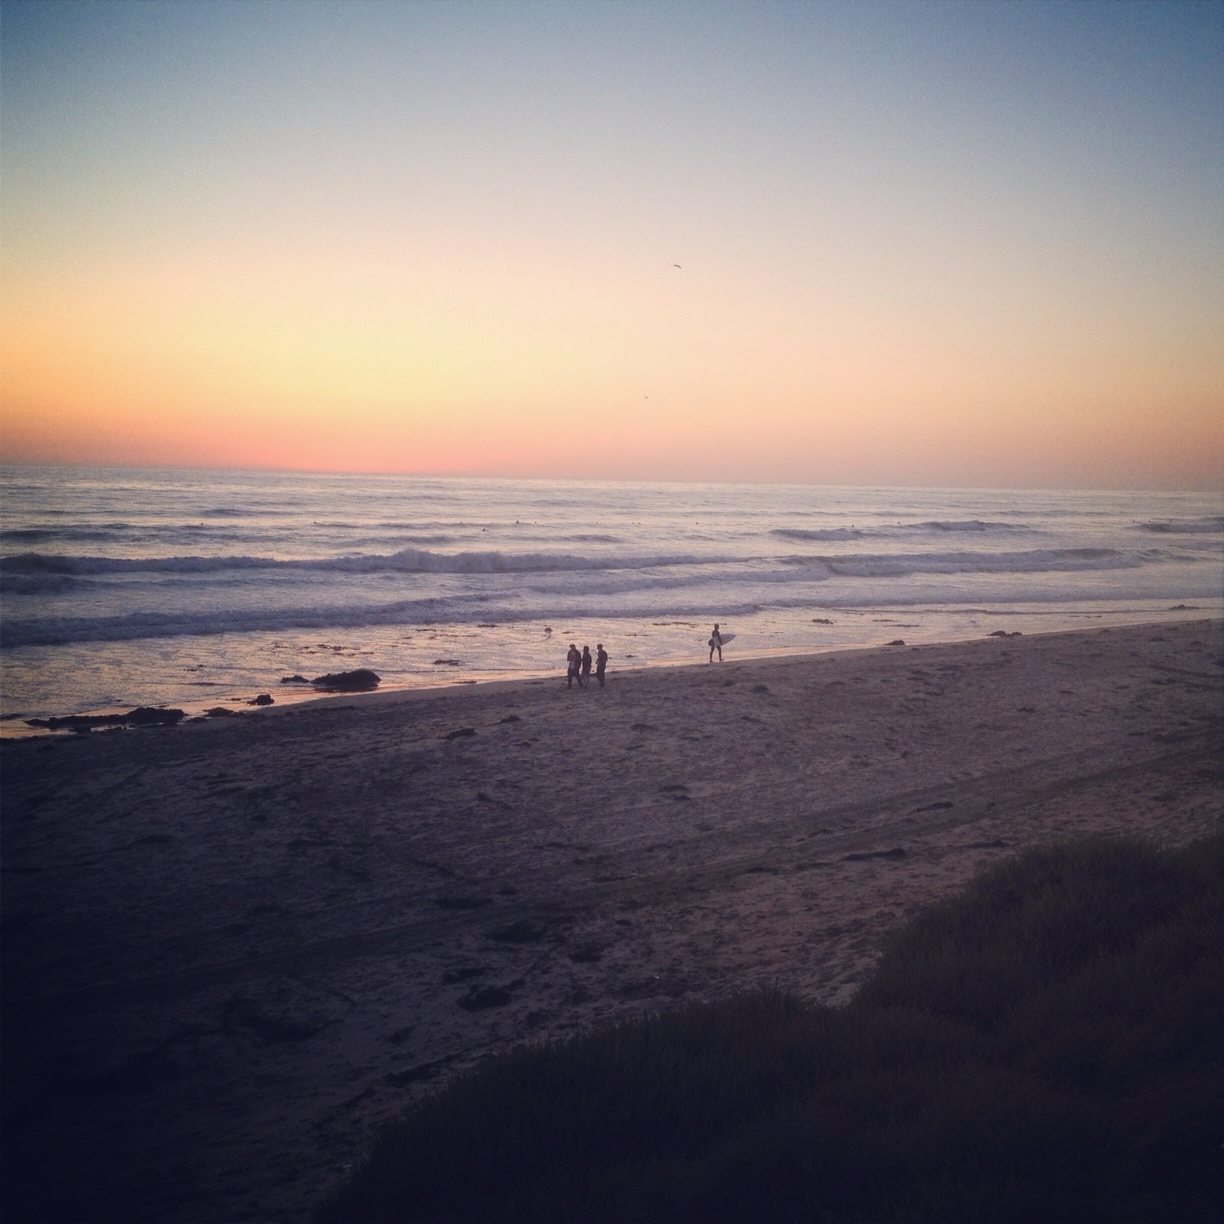 Watching the sun set at the beach is one of best free things to do in San Diego